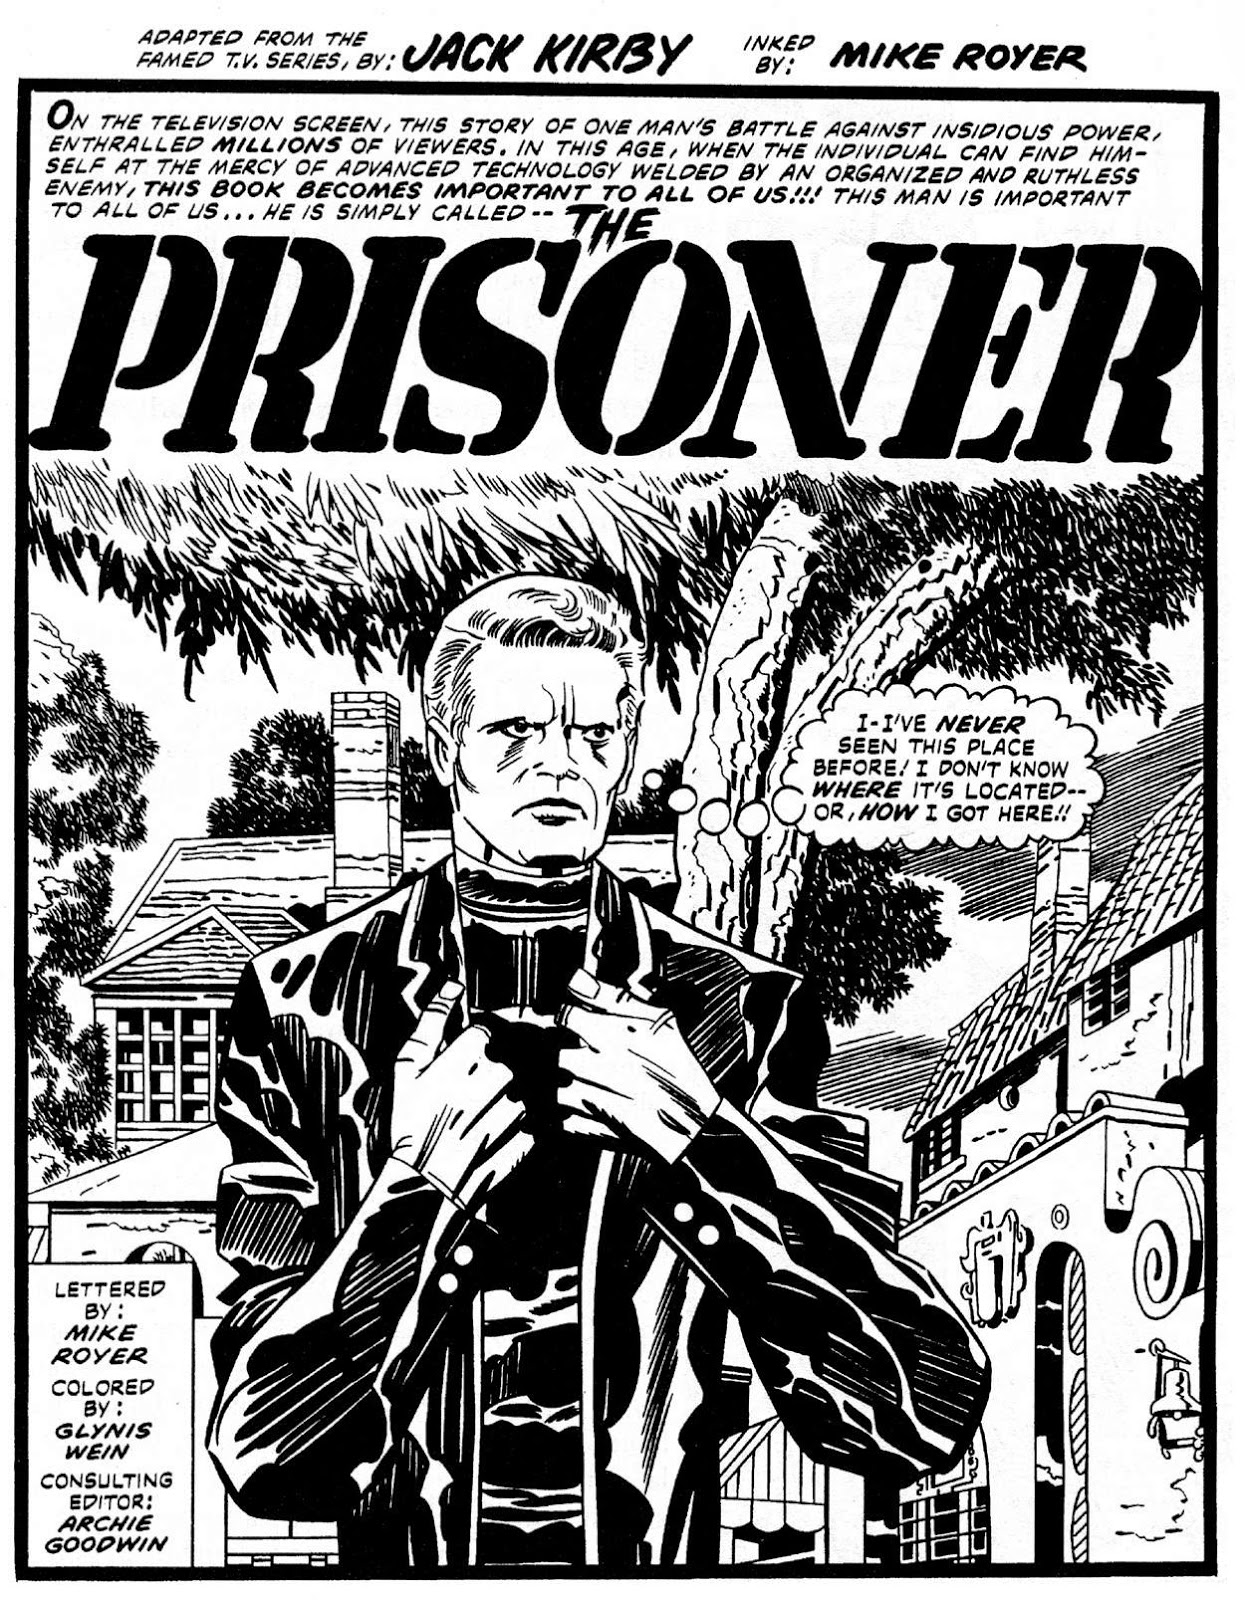 Moonbase Central The Prisoner Comic Strip By Jack Kirby 